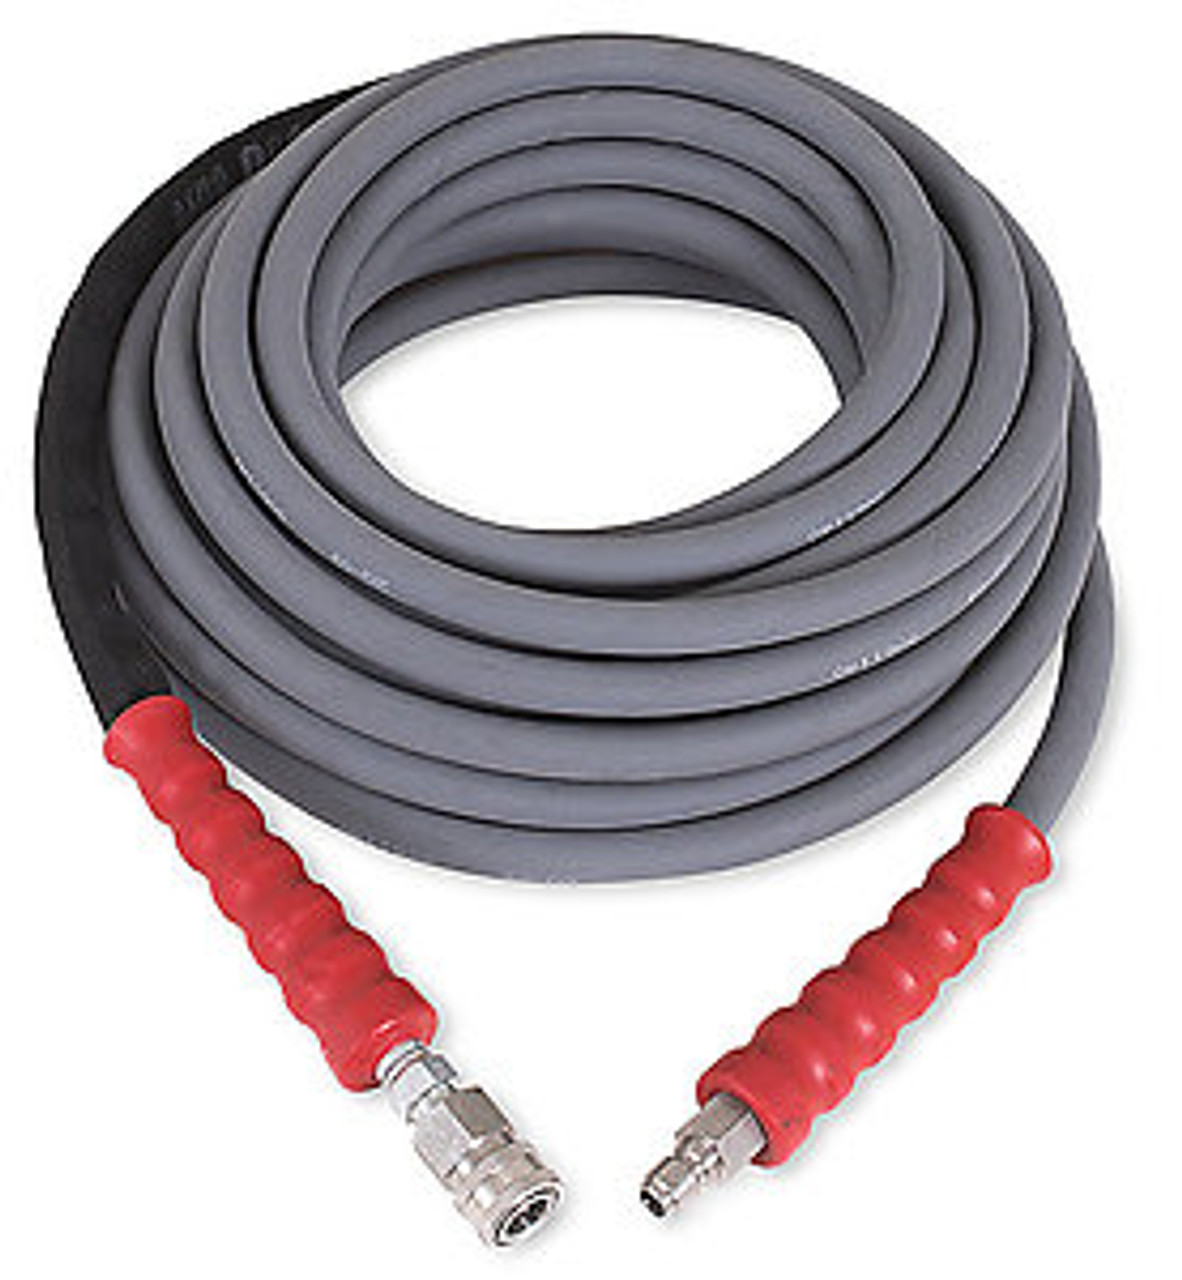 Mi-T-M 851-0317 Extension Hoses and Hose Reels, High Pressure Hose - Cold Water